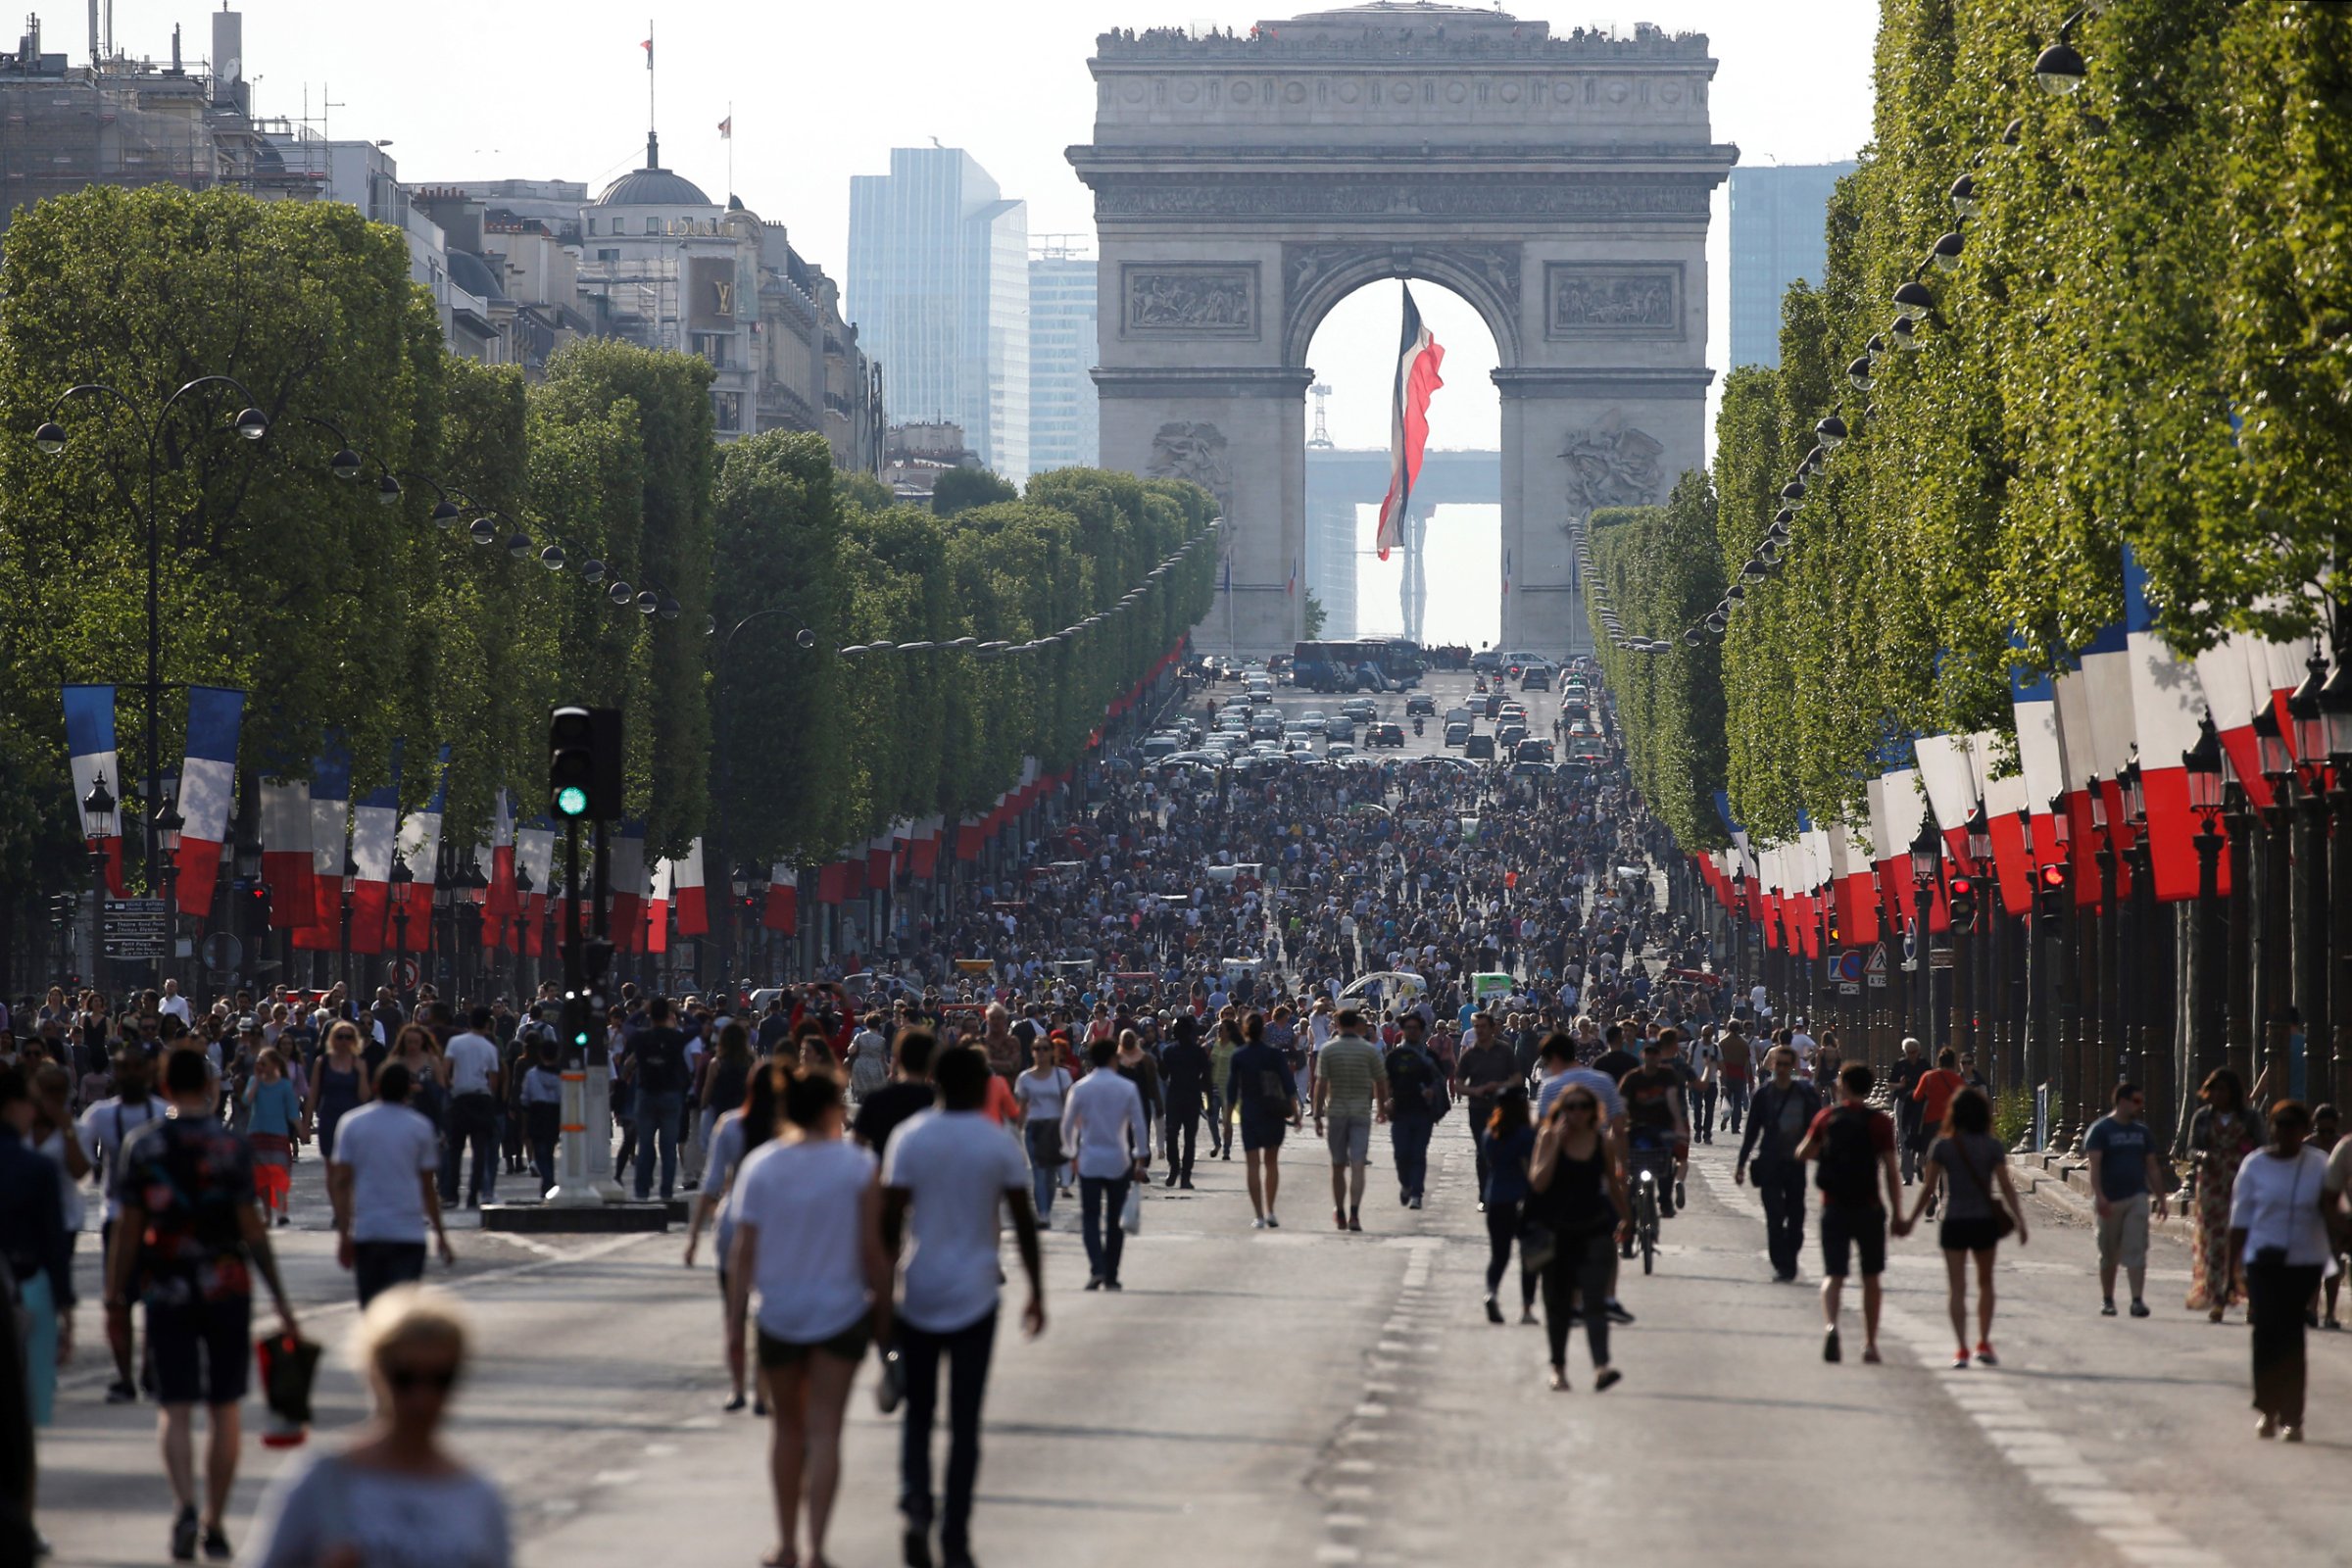 People walk along the Champs Elysees Avenue on May 8, 2016, as the French capital's most famous avenue goes car-free for a day, in the first instalment of a monthly effort to tackle pollution in Paris. / AFP / THOMAS SAMSON (Photo credit should read THOMAS SAMSON/AFP/Getty Images)